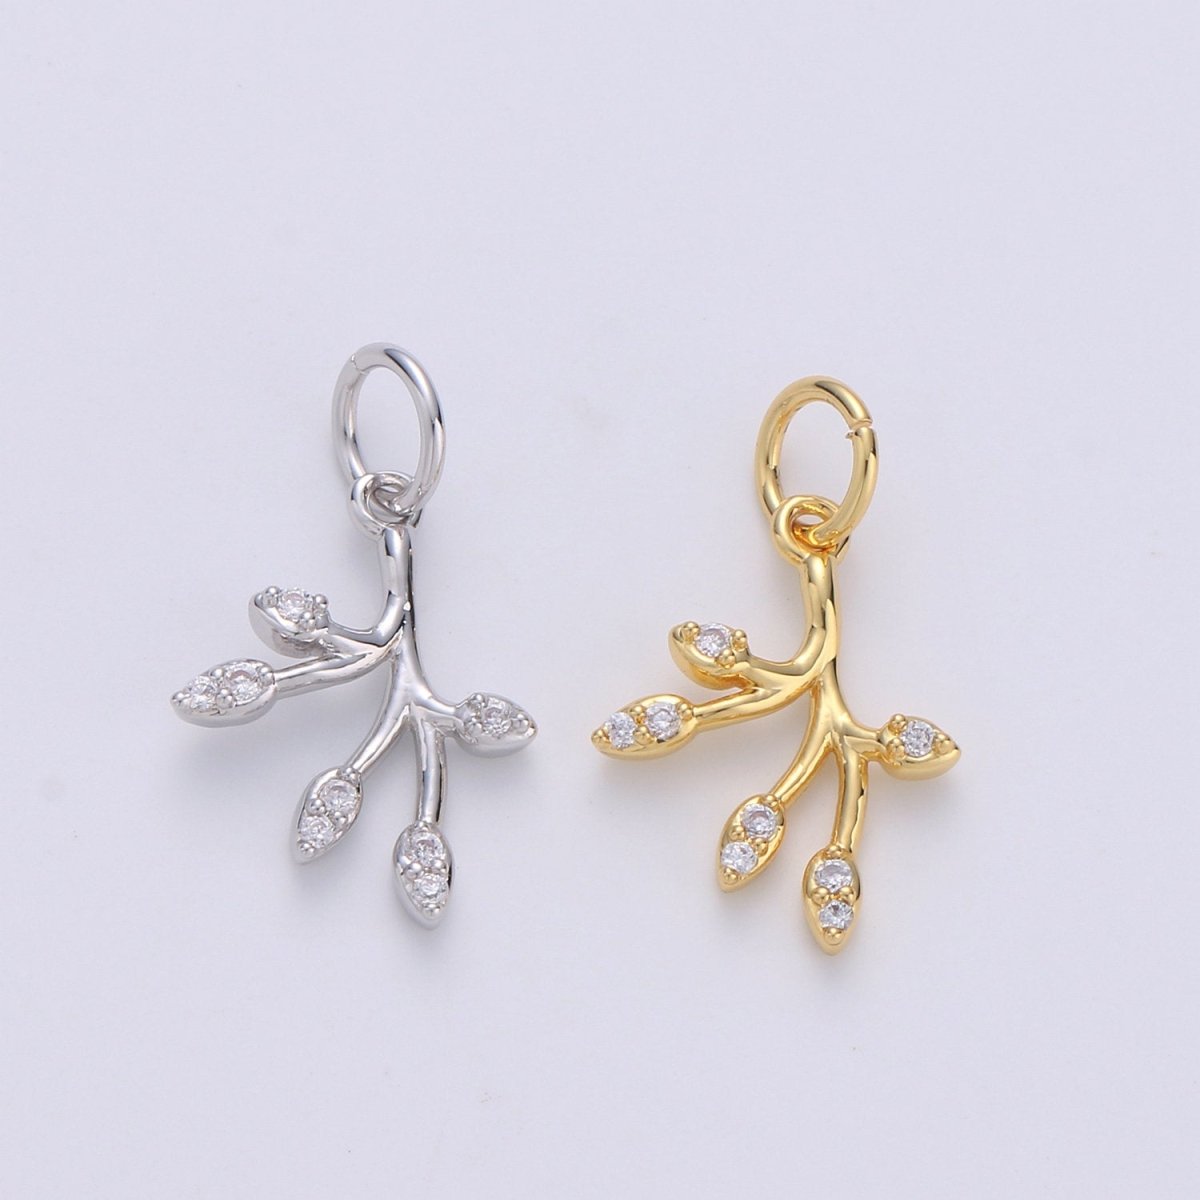 Gold Olive Leaf Charms Pendant,Tree Branch Leaf Charm Fit DIY Earring Necklace Jewelry Accessory DIY Craft Micro Pave Dainty Charm D-549 D-550 - DLUXCA